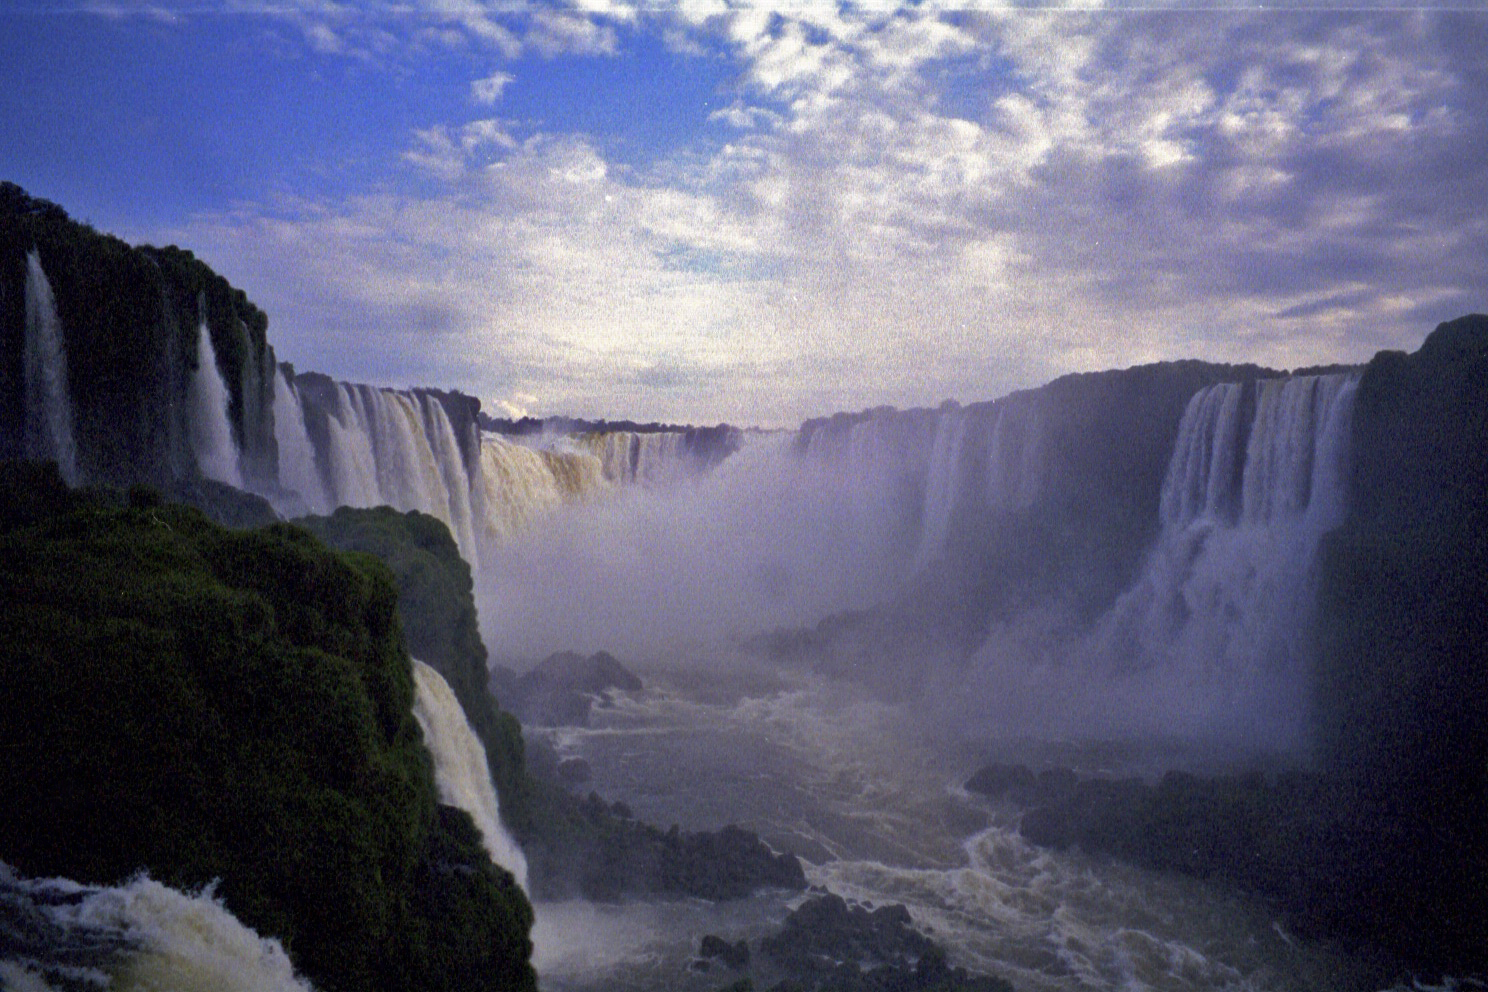 Iguazu Falls, Brazil (note: this image is not suitable for large prints)